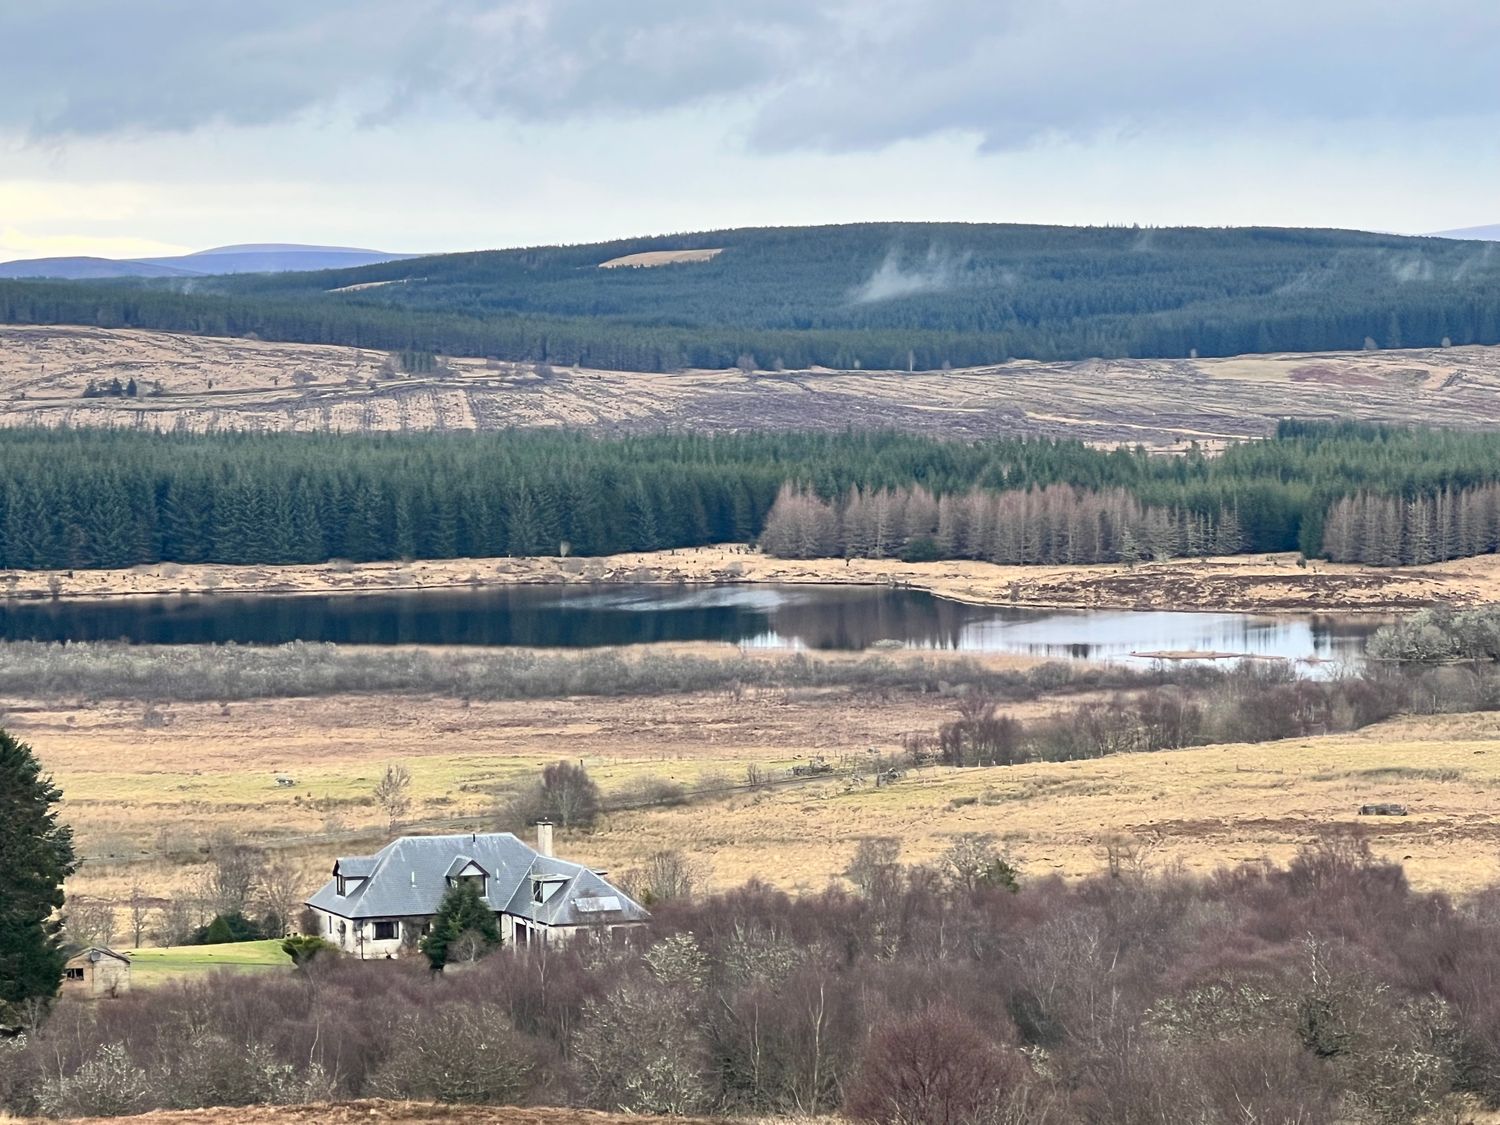 Challenger Lodge in Lairg, Highlands. Remote location overlooking moorland, lochs and wildlife. WiFi